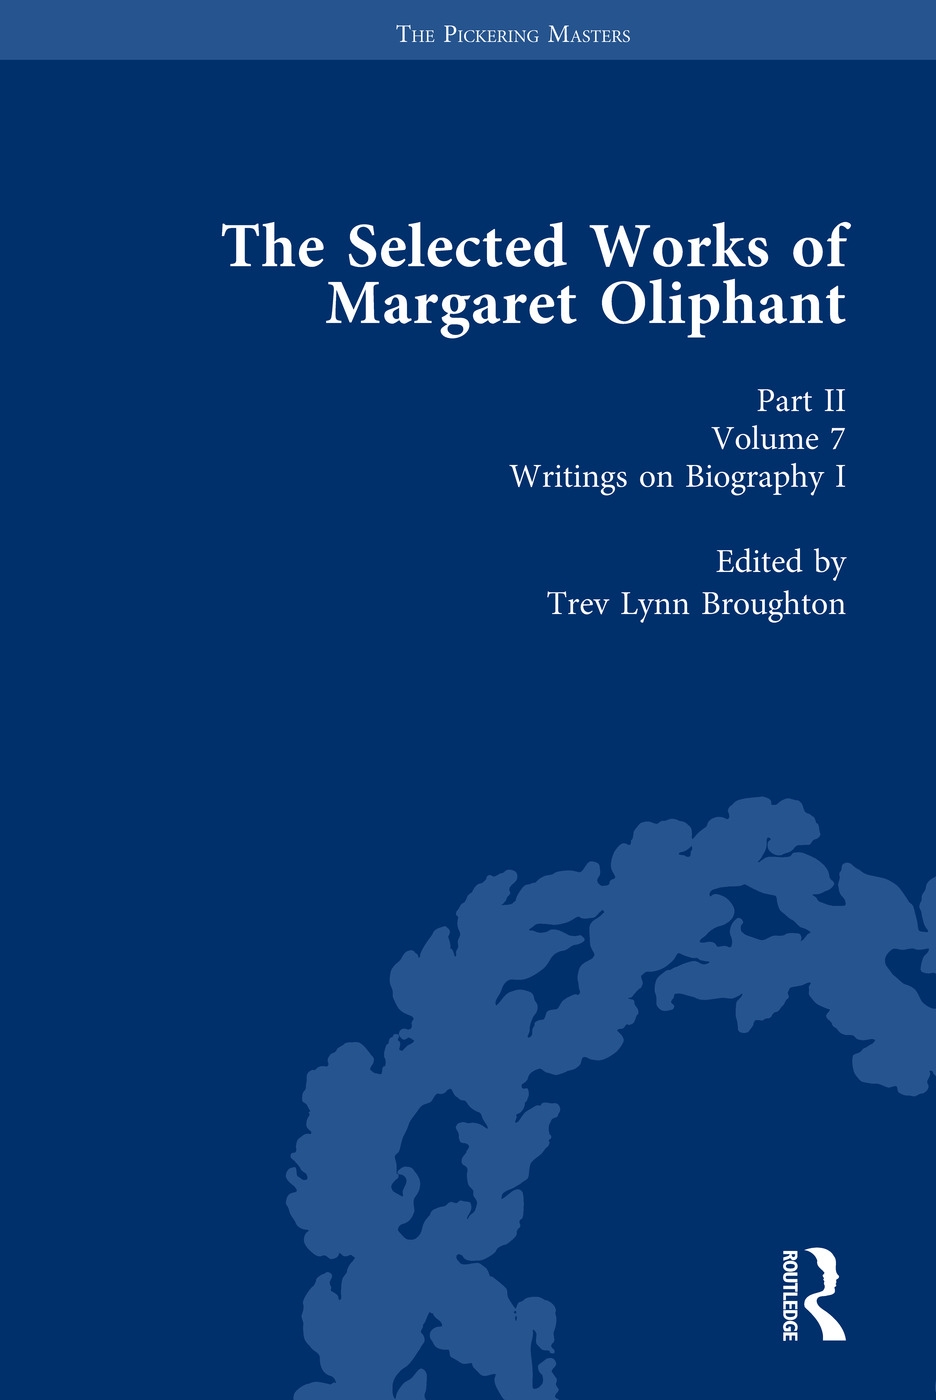 The Selected Works of Margaret Oliphant, Part II Volume 7: Writings on Biography I